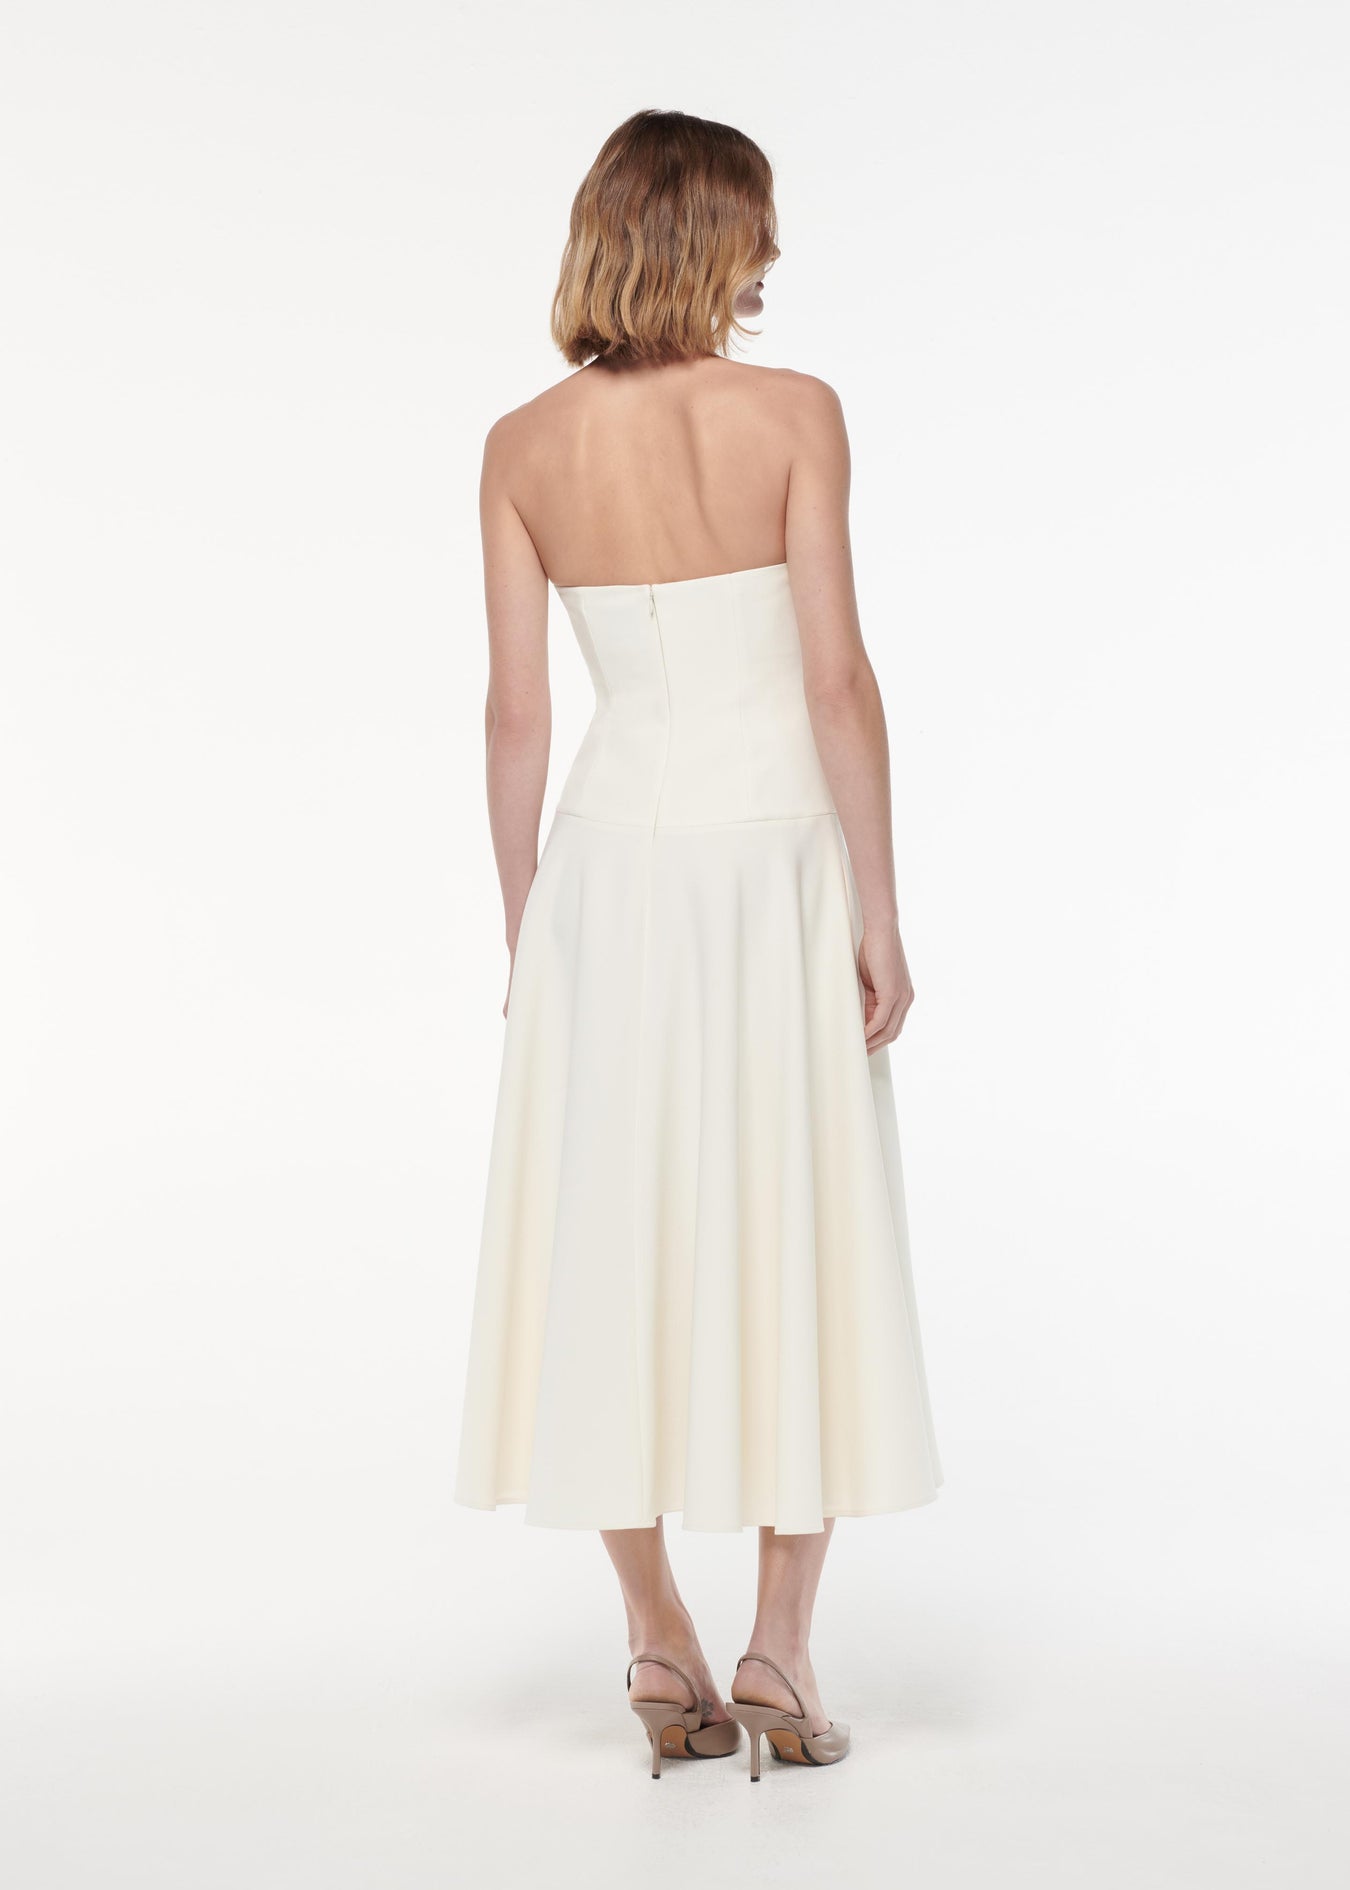 A photograph of a woman wearing a Strapless Crepe Midi Dress in Cream